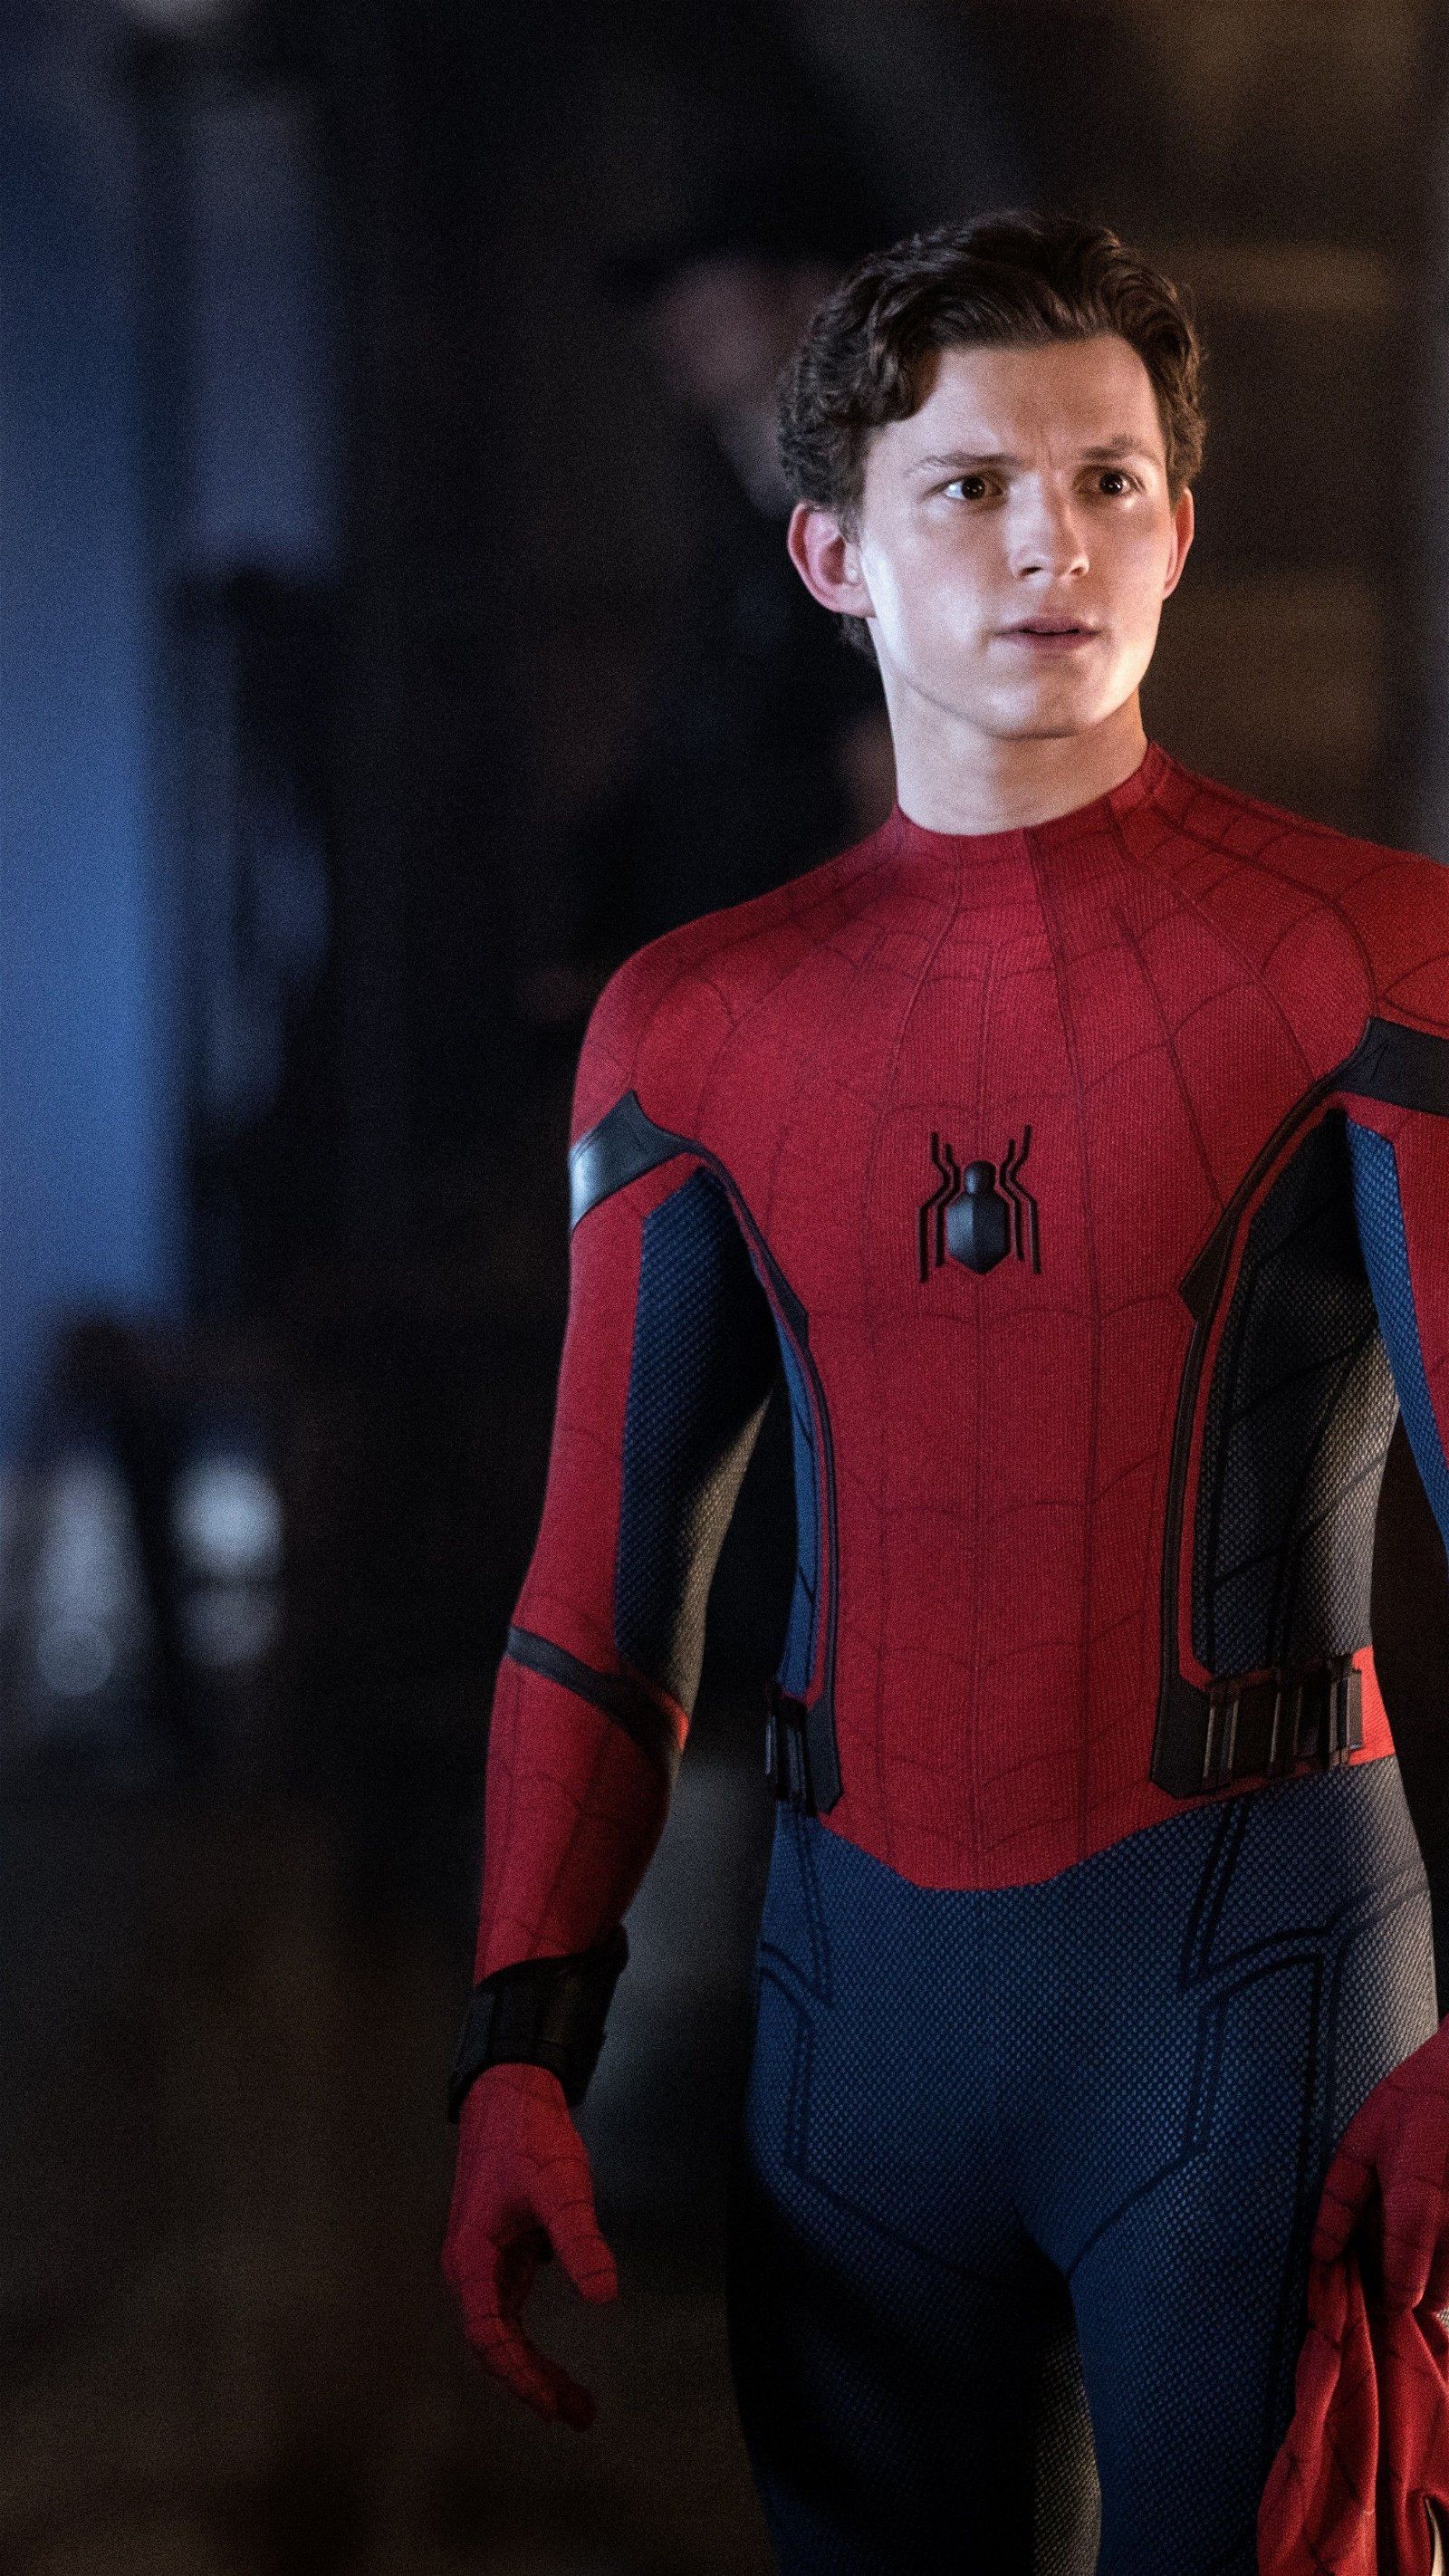 Tom Holland as Spider-Man in a red and blue suit - Tom Holland